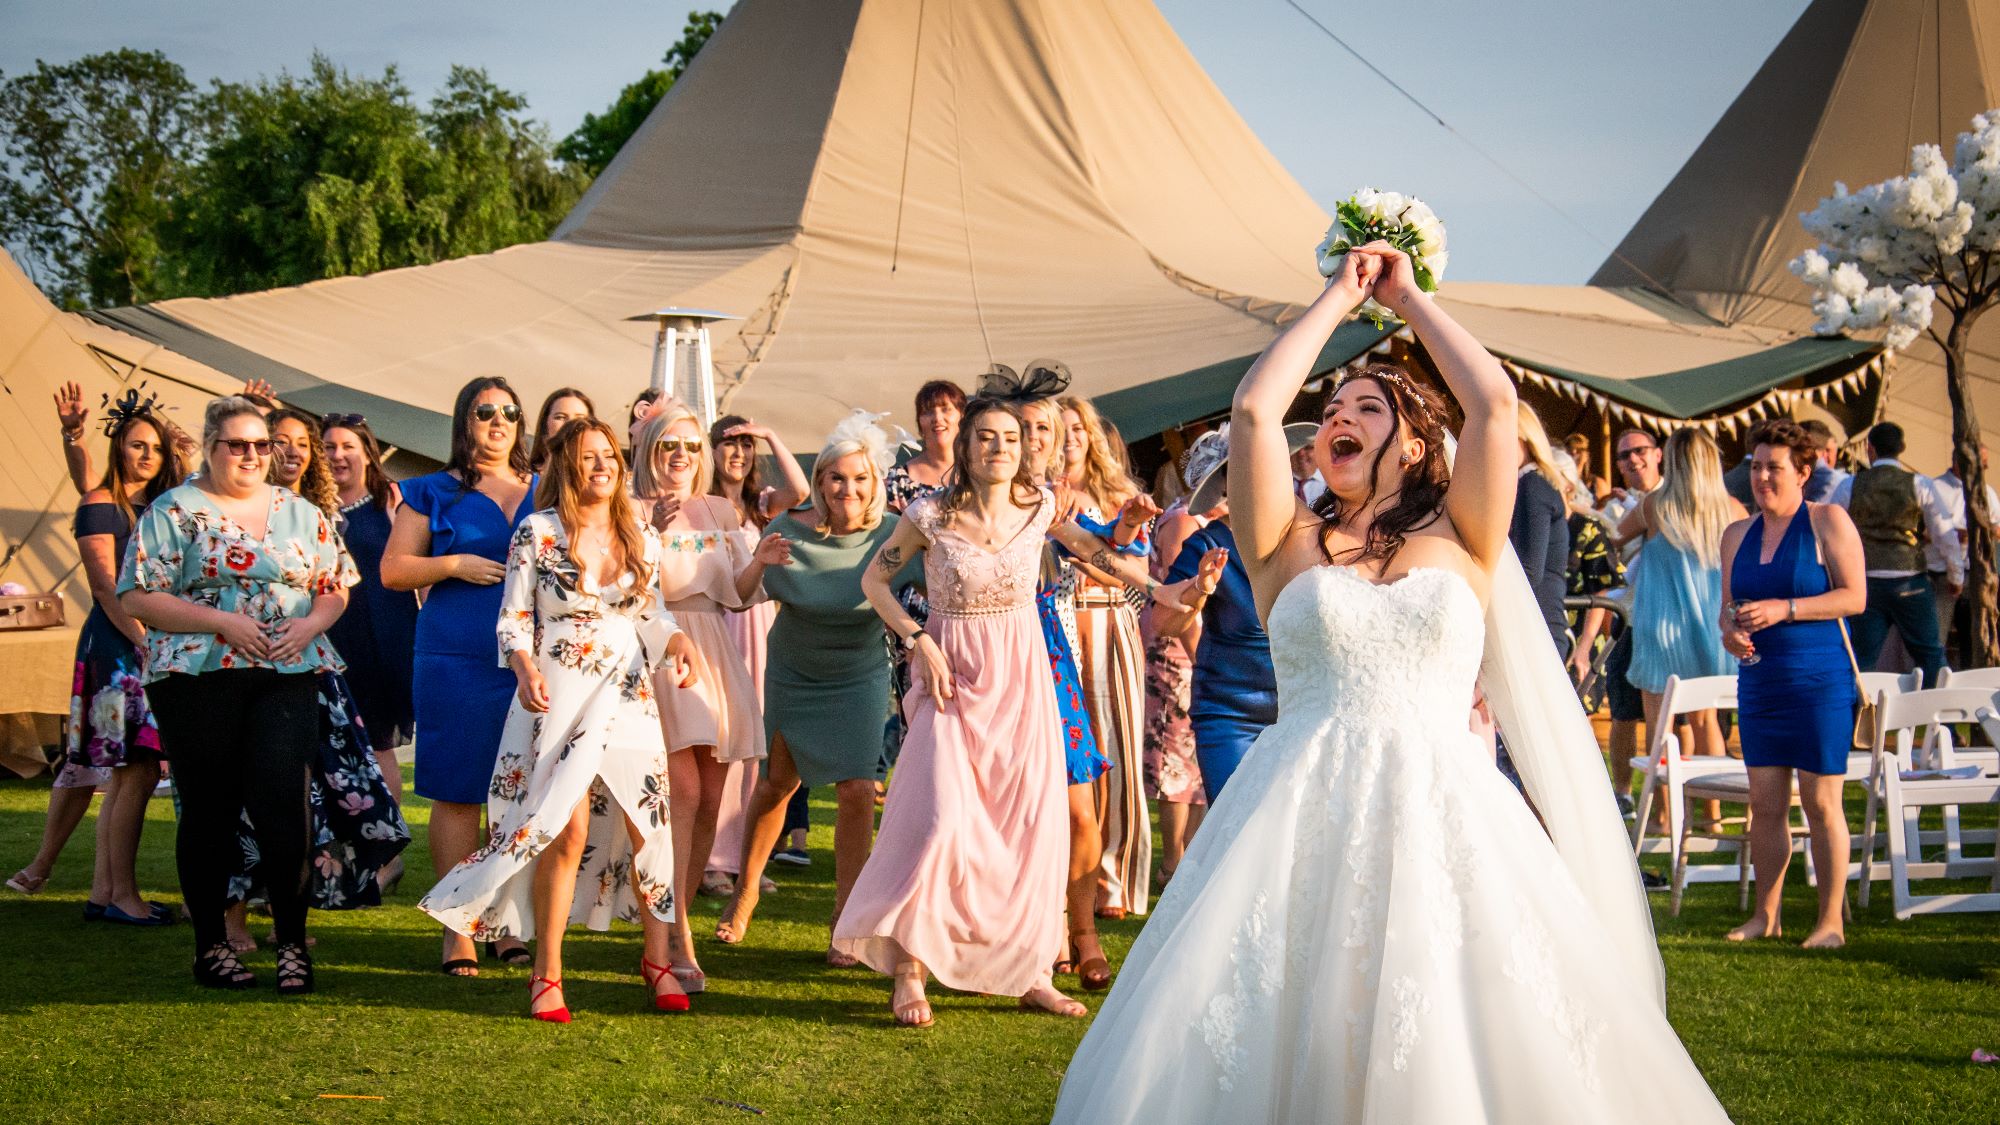 A bride gets ready to throw her bouquet at her wedding in Pickering, North Yorkshire. A group of women battle in hte background to be at the front ready to catch it.